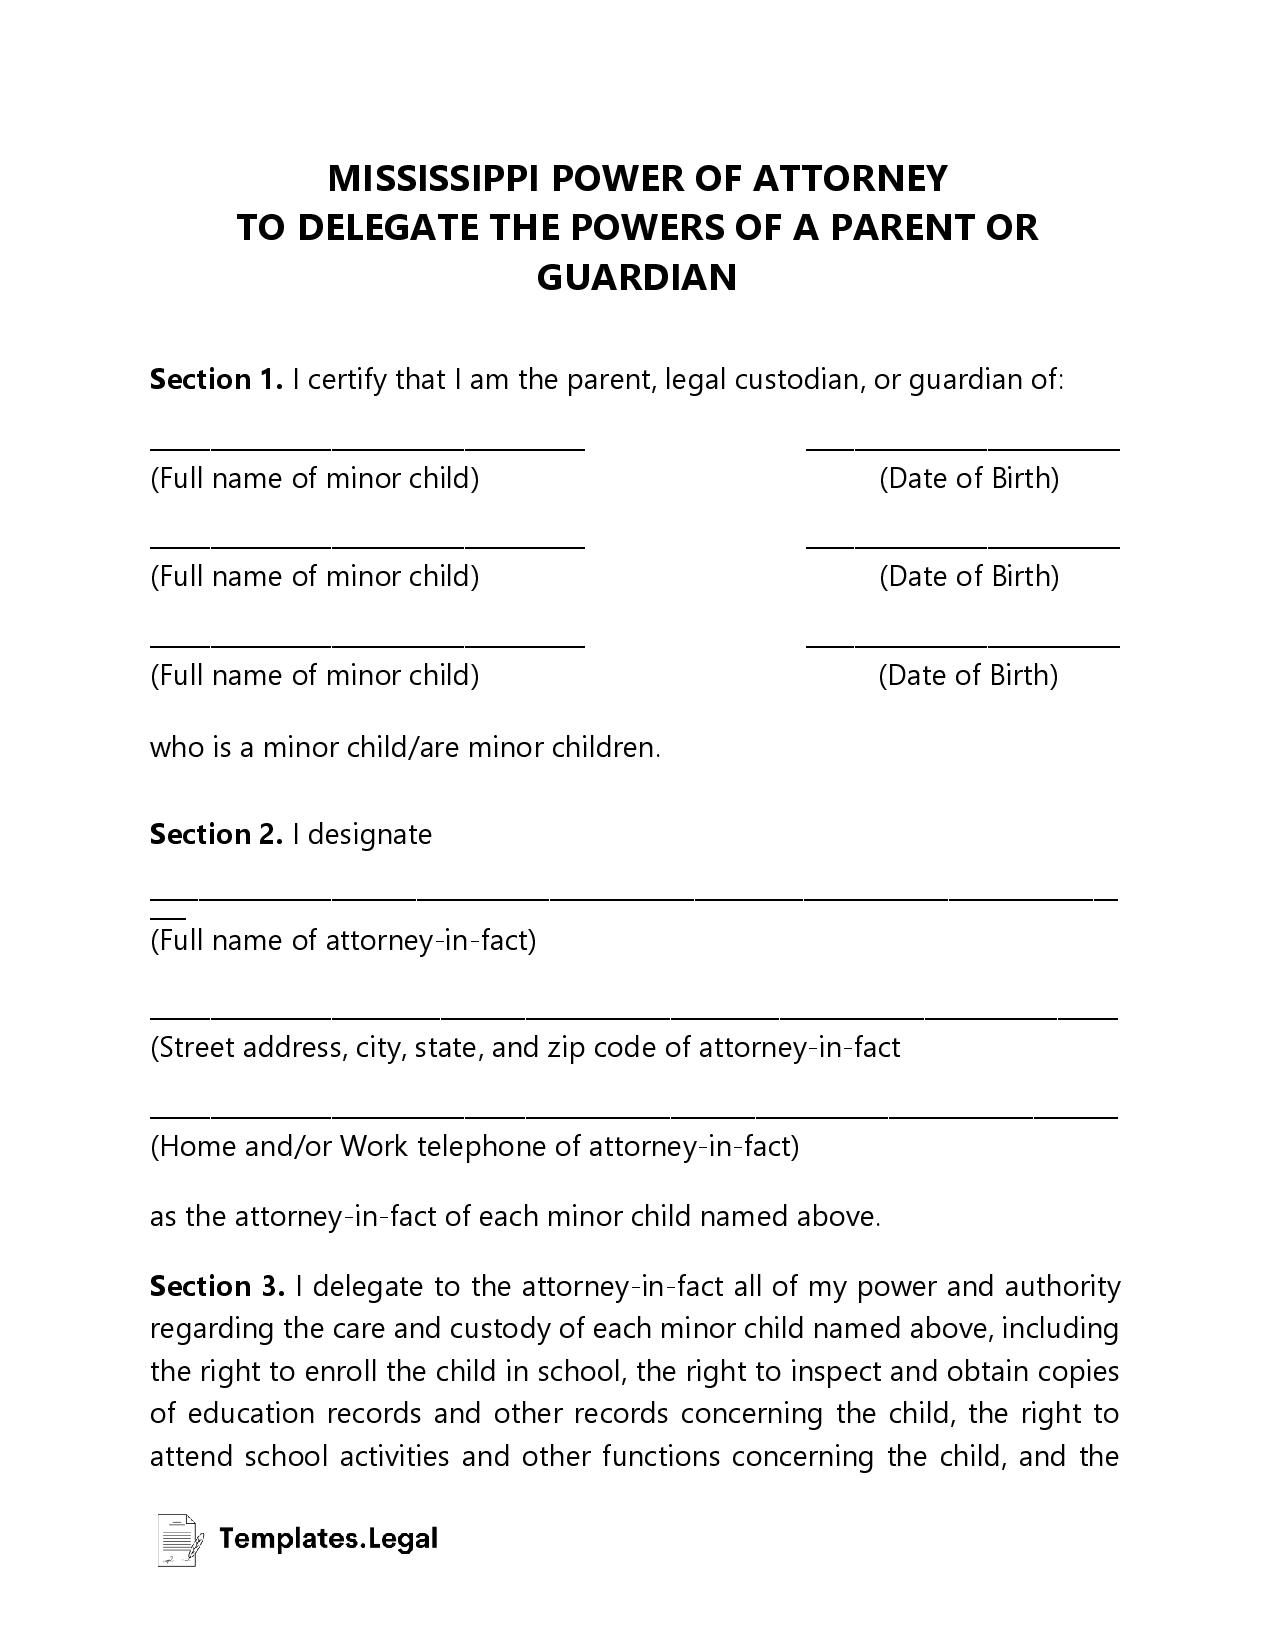 Mississippi Minor (Child) Power of Attorney - Templates.Legal